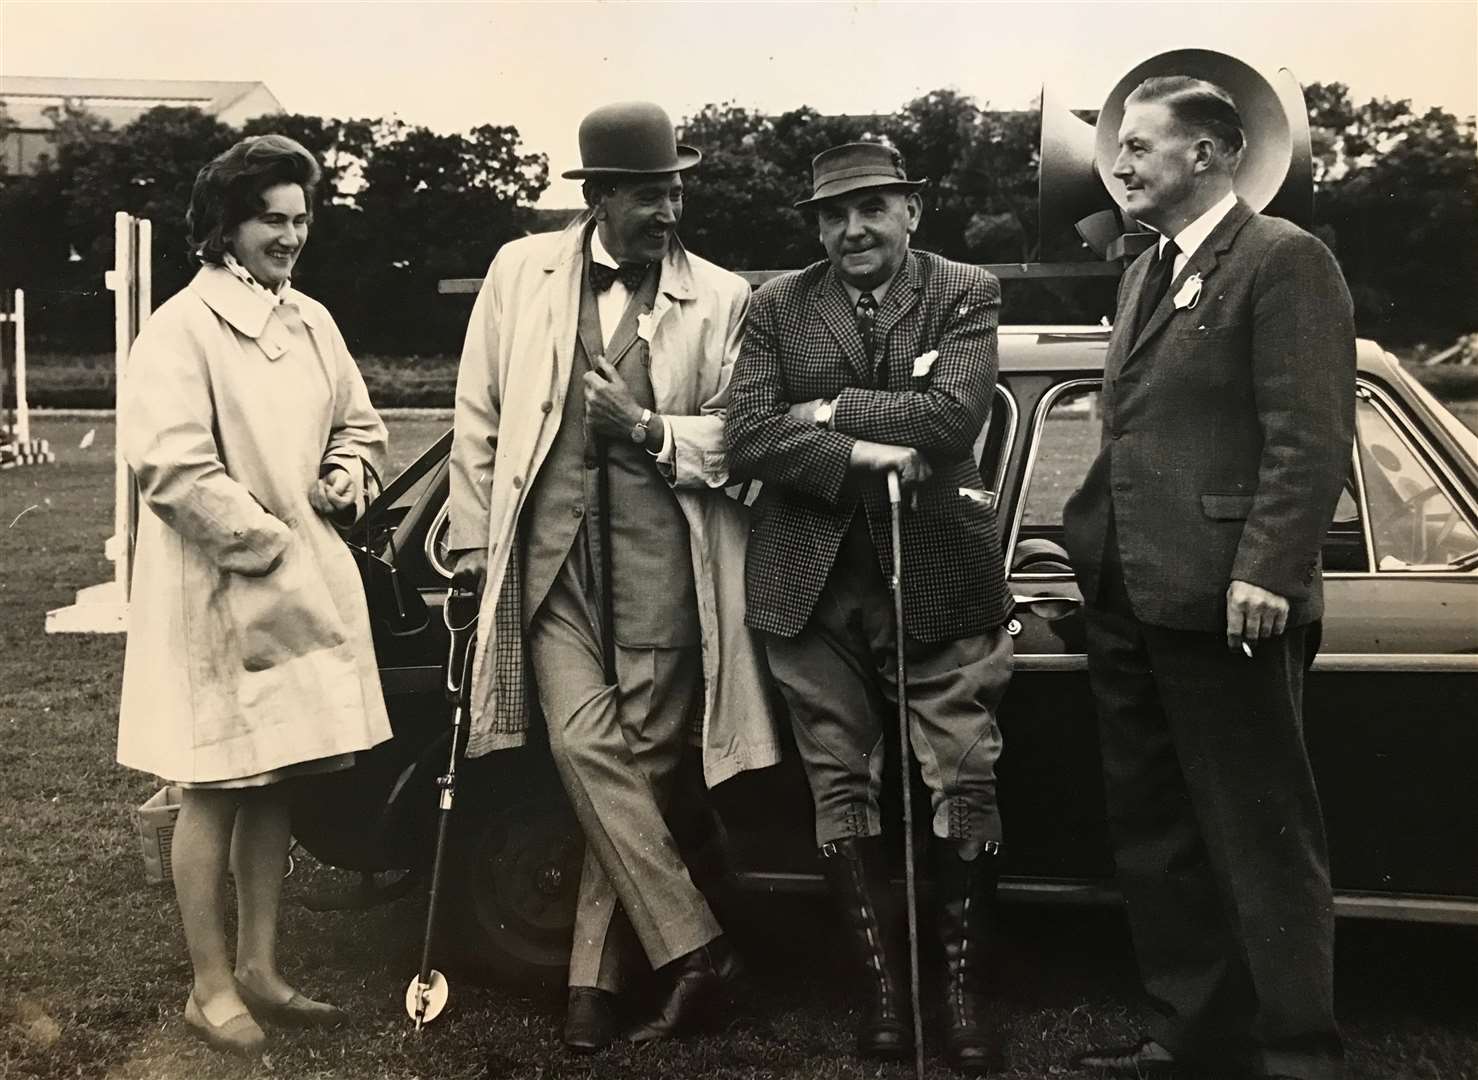 Taking a short break at the County Show in Wick, 1972, are M Downie, Bill King, William Ronaldson and Sandy Gow.